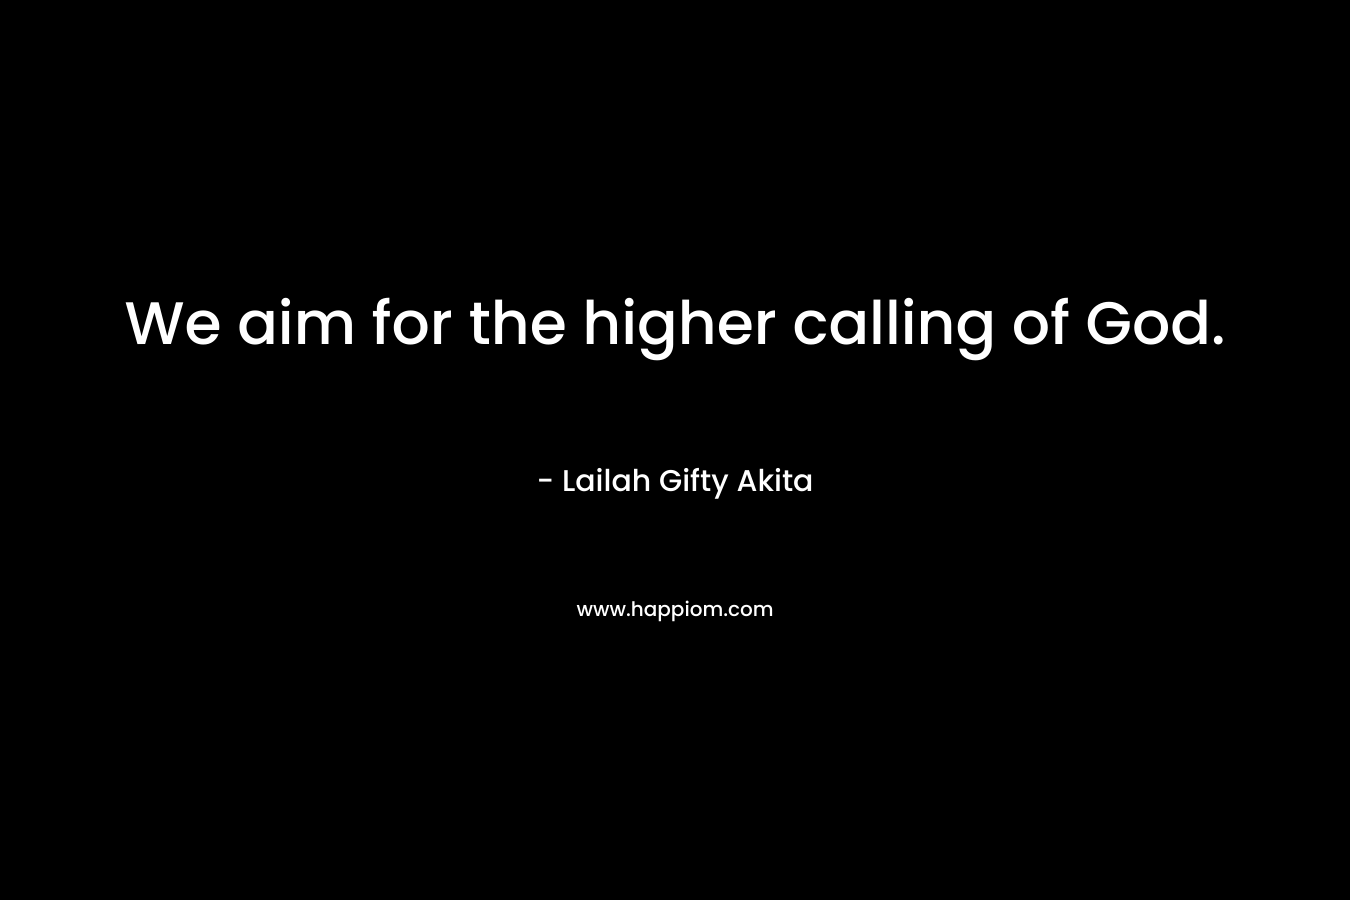 We aim for the higher calling of God.